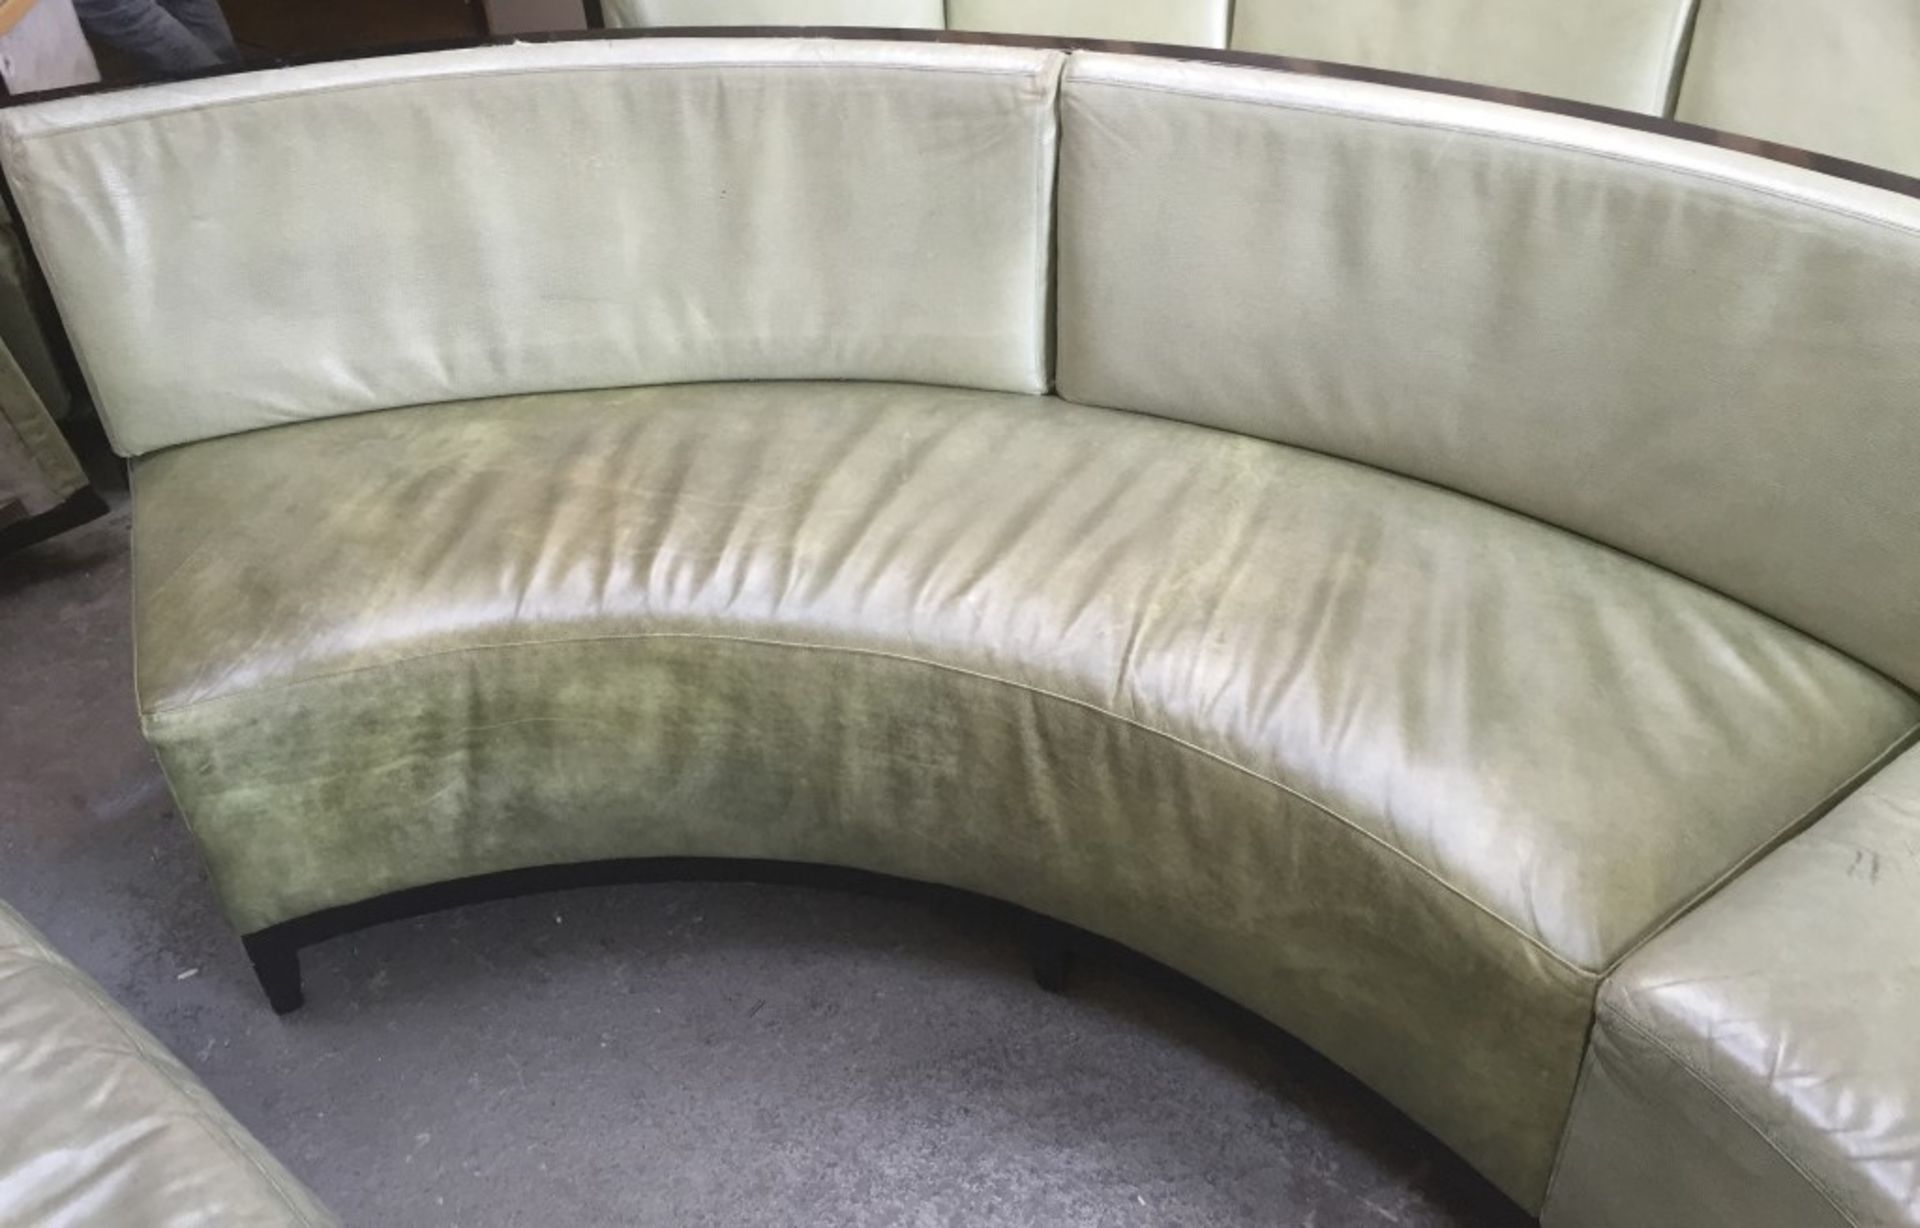 1 x Luxury Upholstered Curved Seating Area - Recently Removed From Nobu - Dimensions: W285 x D62cm x - Image 14 of 23